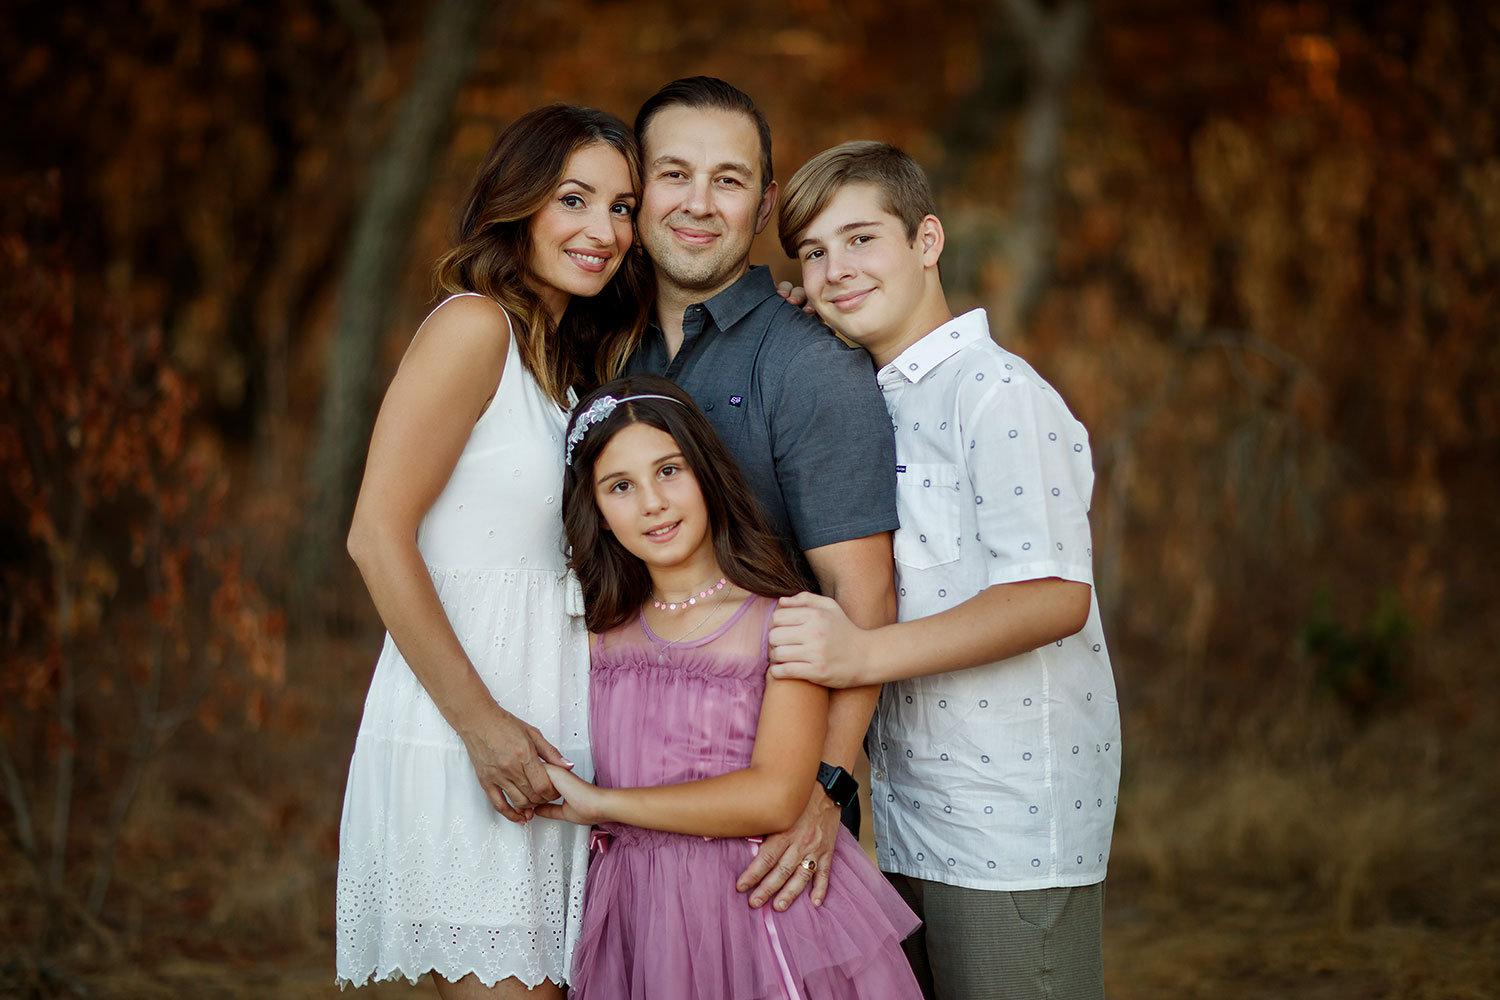 The 10 best poses for family photographs | Fort Lauderdale Photographer